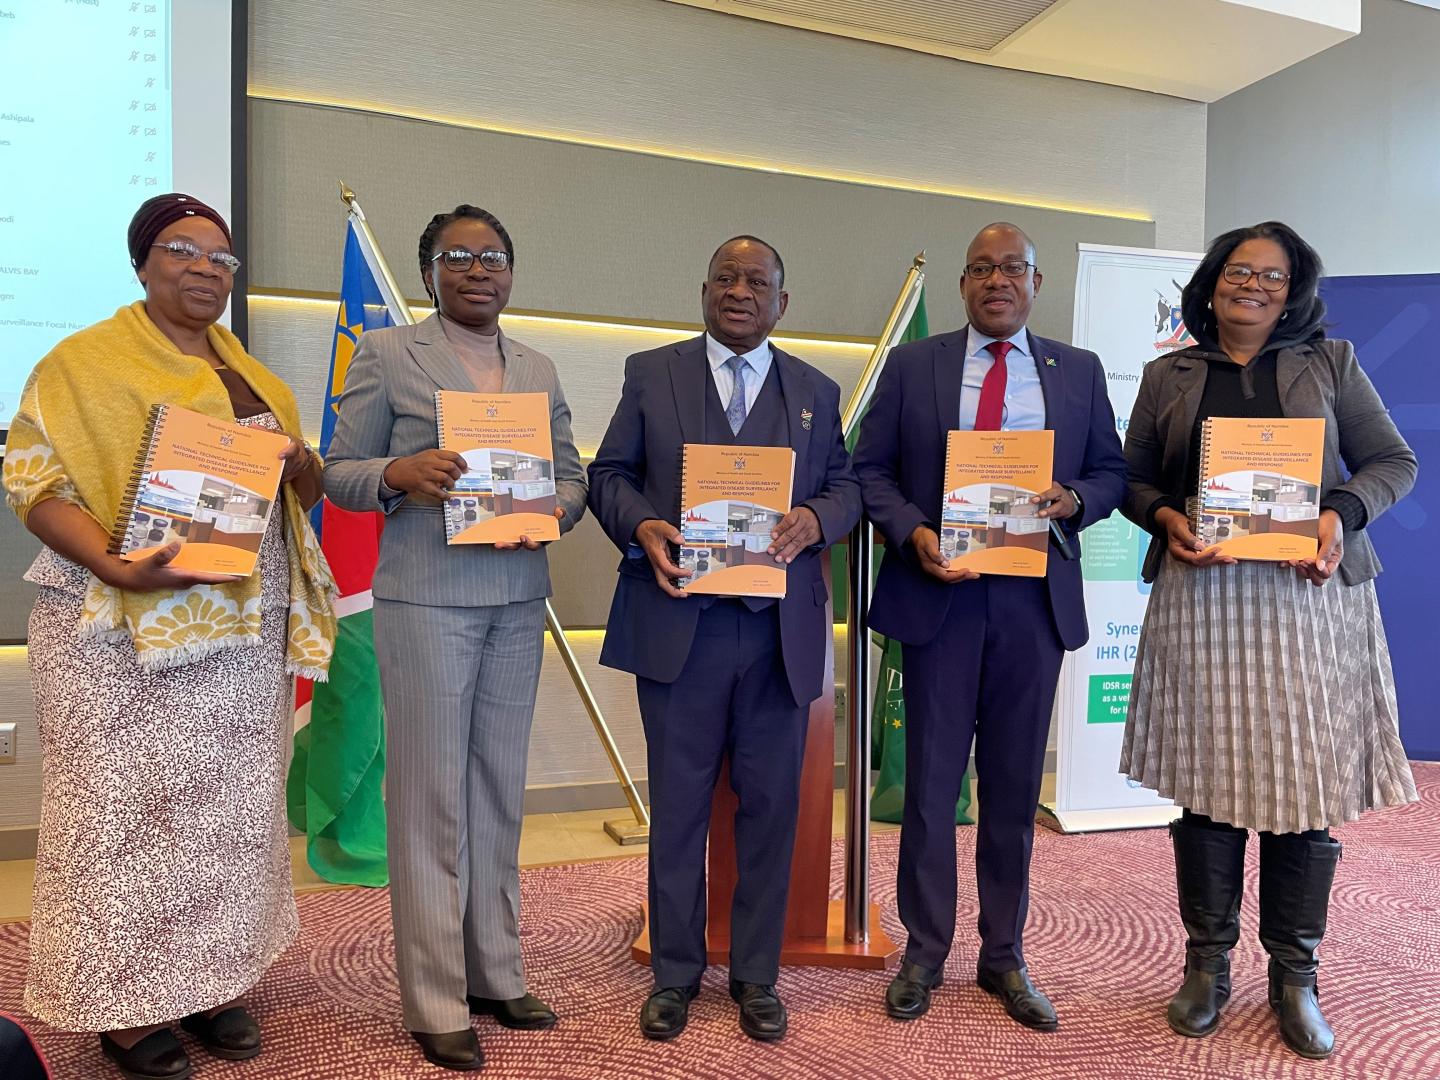 Dr Kalumbi Shangula, Minister of Health and Social Services, Dr Mary Brantuo, WHO Officer-in-Charge, Mr. Ben Nangombe, Executive Director of MHSS, Mrs Philomena Ochurus, Director of Health Information and Research and Mrs Kaura also from the Directorate of Health Information and Research